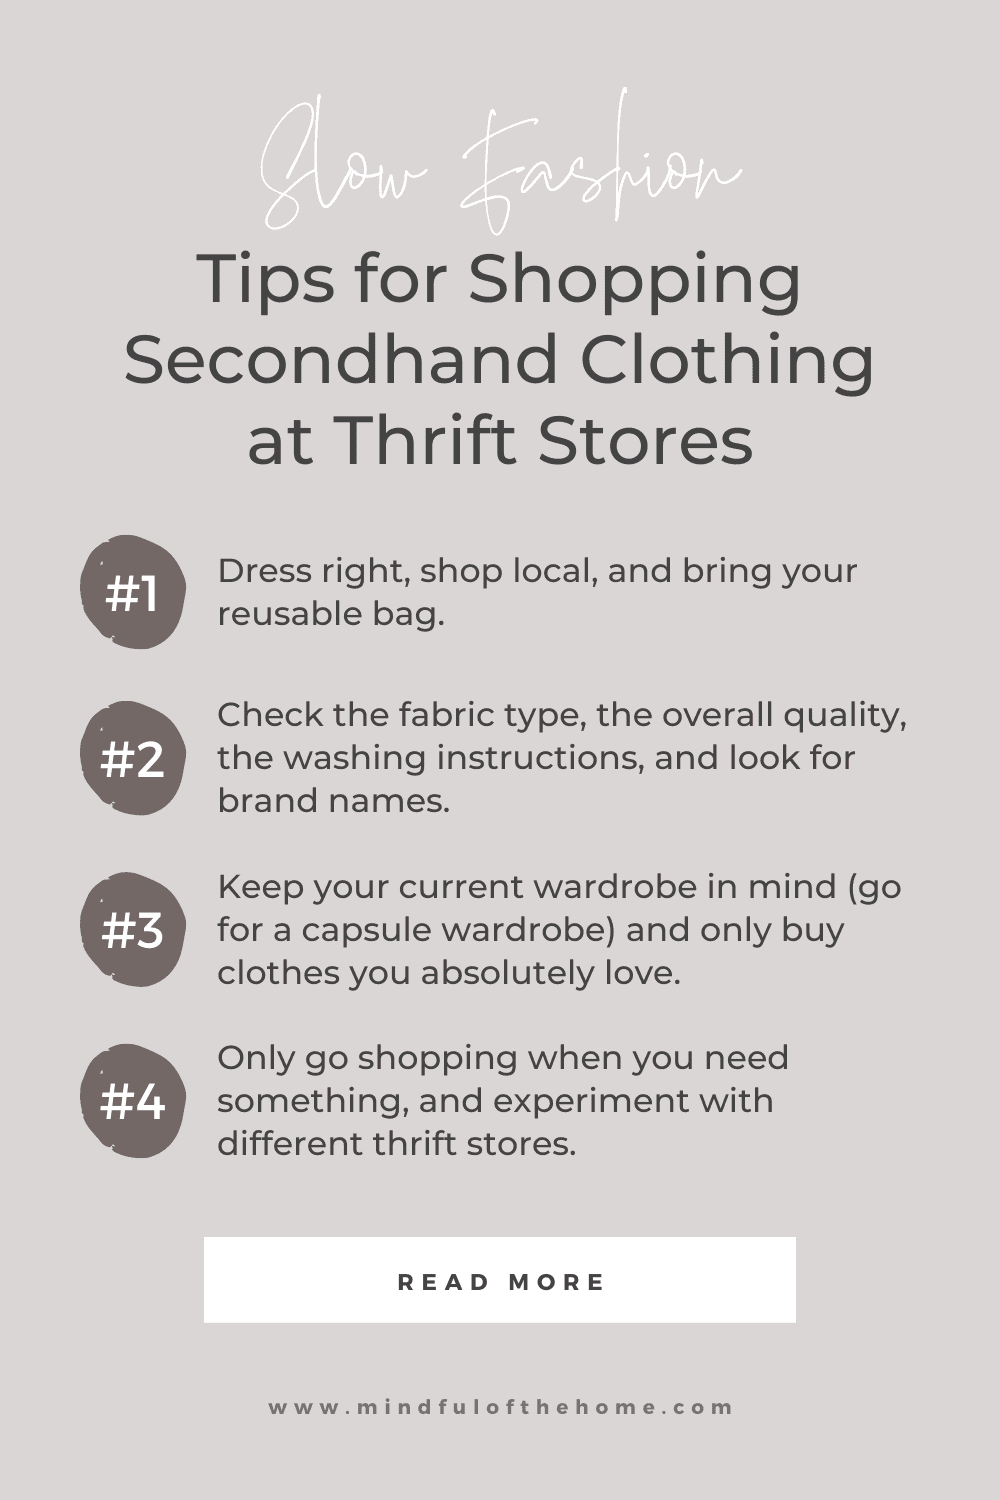 https://mindfulofthehome.com/wp-content/uploads/2021/01/slow-fashion-tips-for-shopping-clothing-at-thrift-stores-1000x1500.png